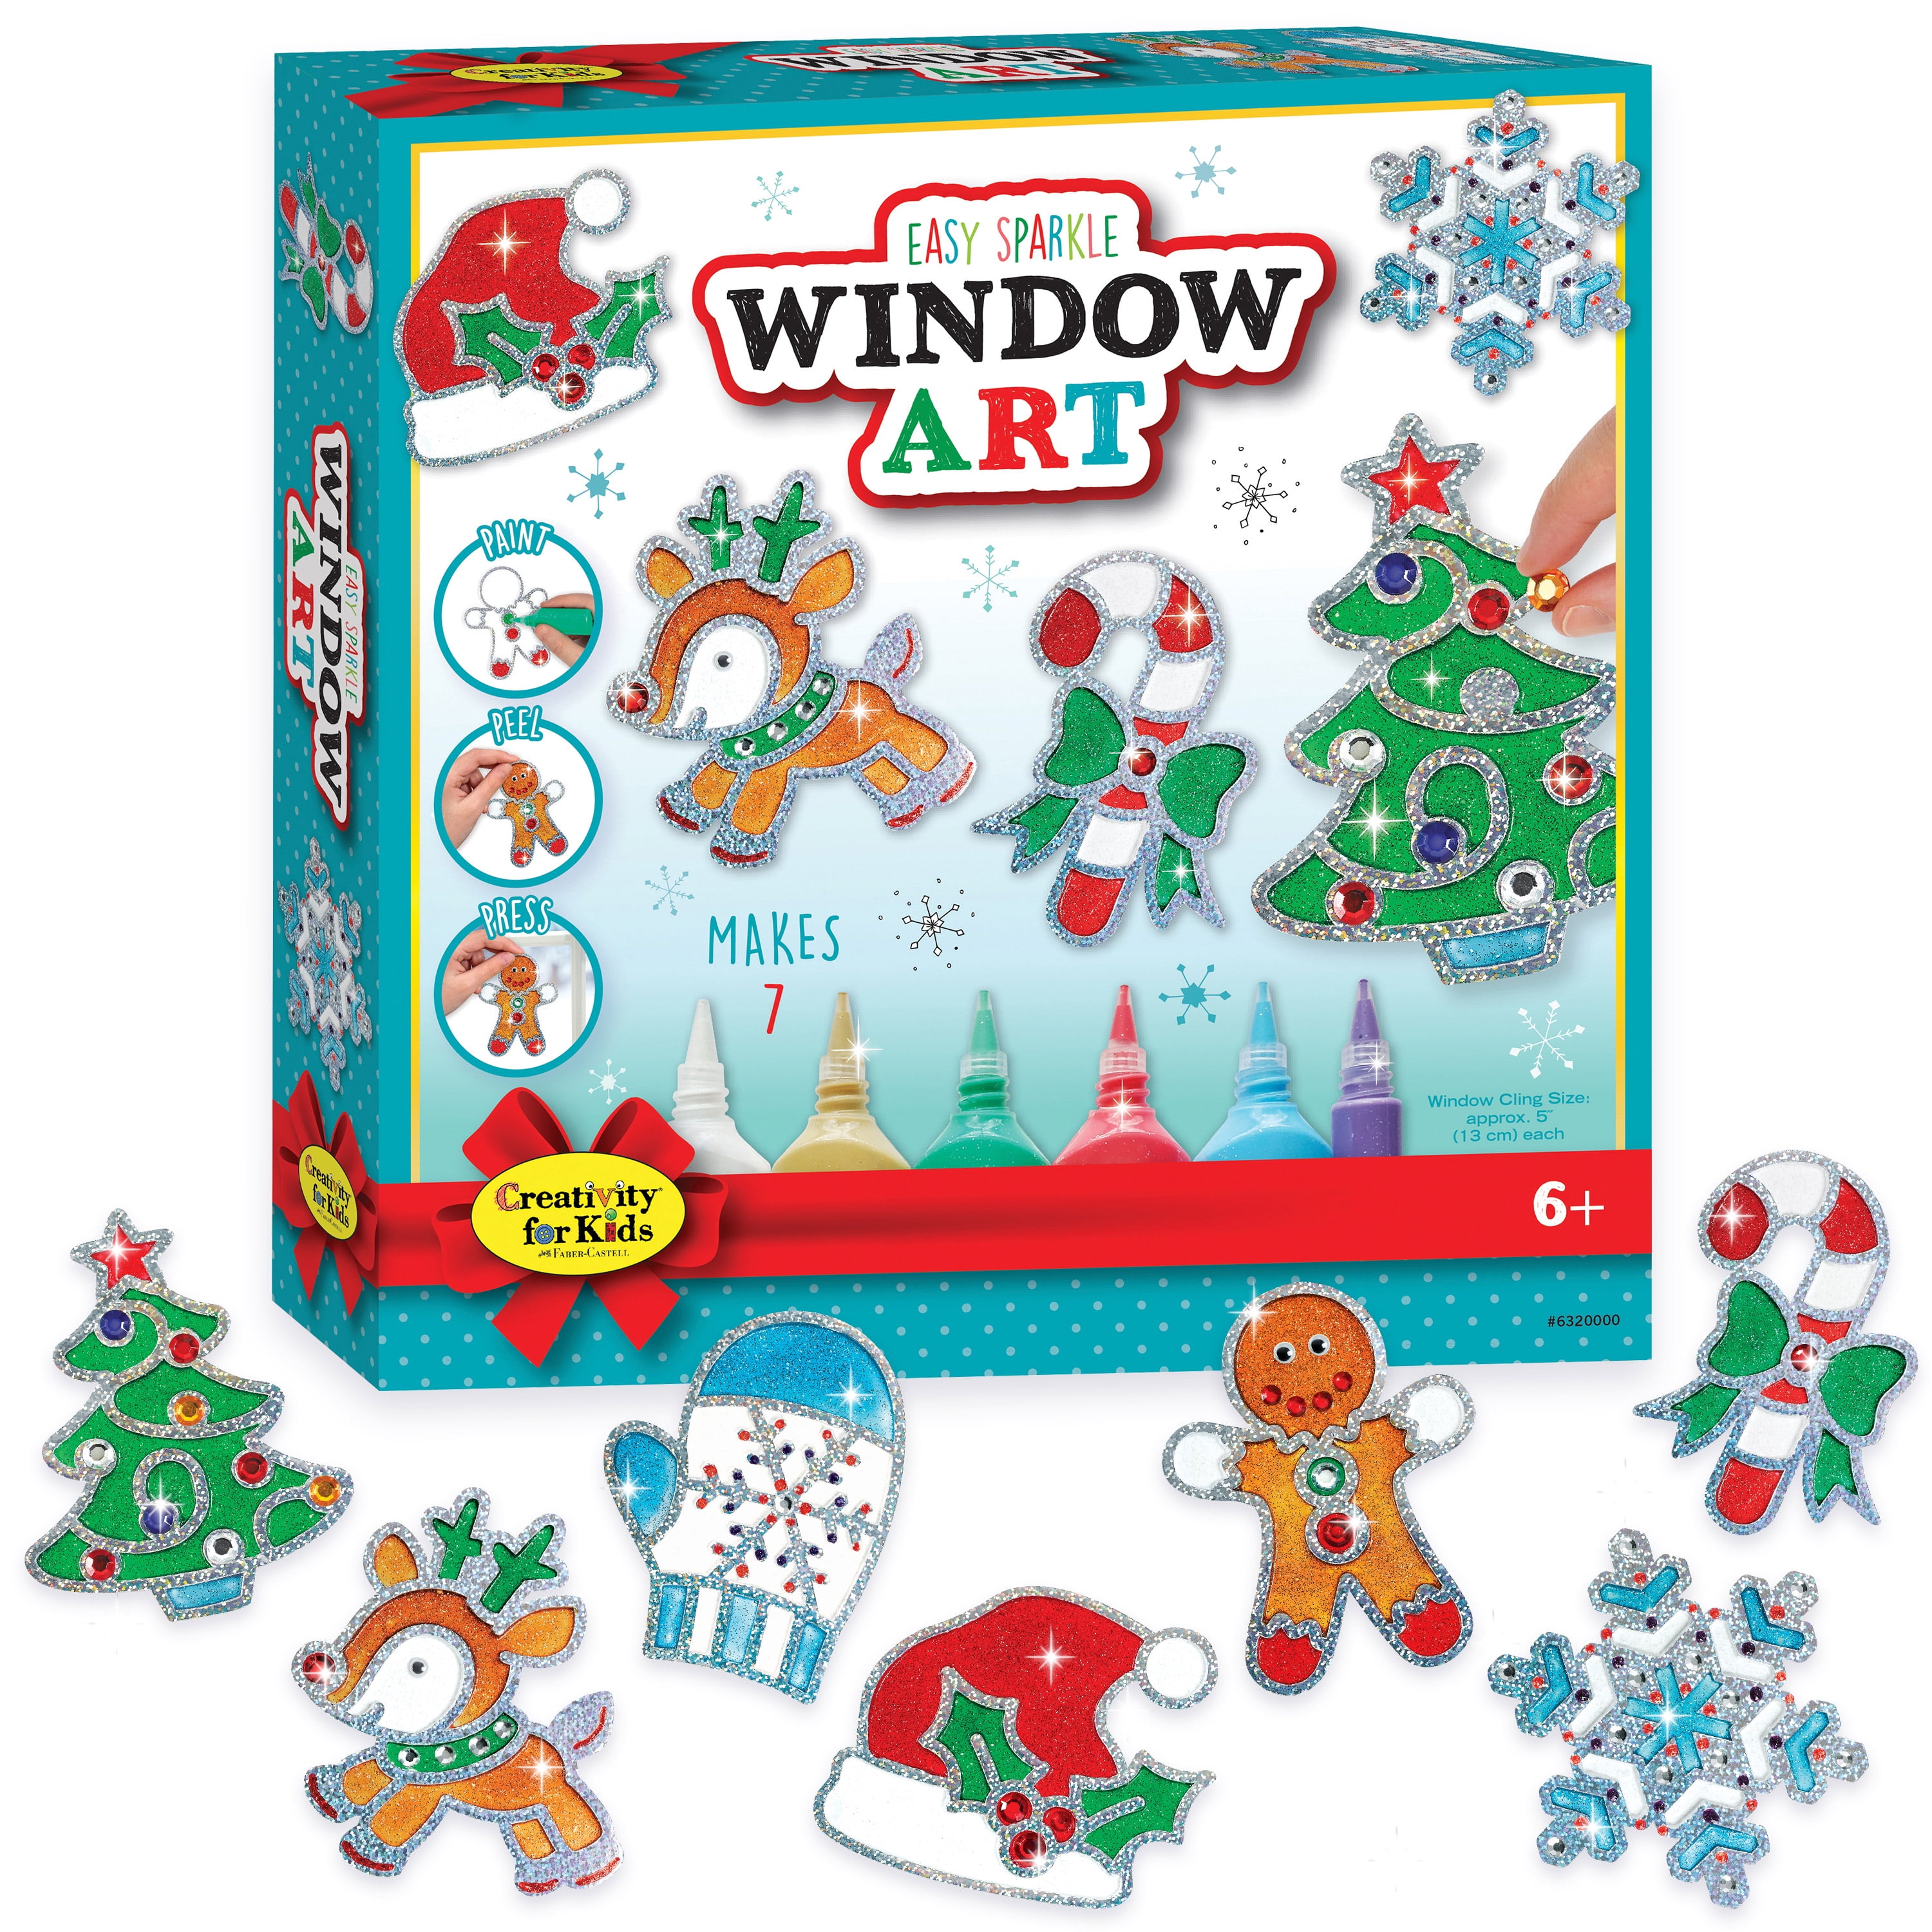  Creativity for Kids Easy Sparkle Window Art Kit - Paint and  Decorate 7 DIY Suncatchers, Arts and Crafts for Kids Ages 6-8+, Activities  for Kids, Rainbow Sprinkles : Toys & Games